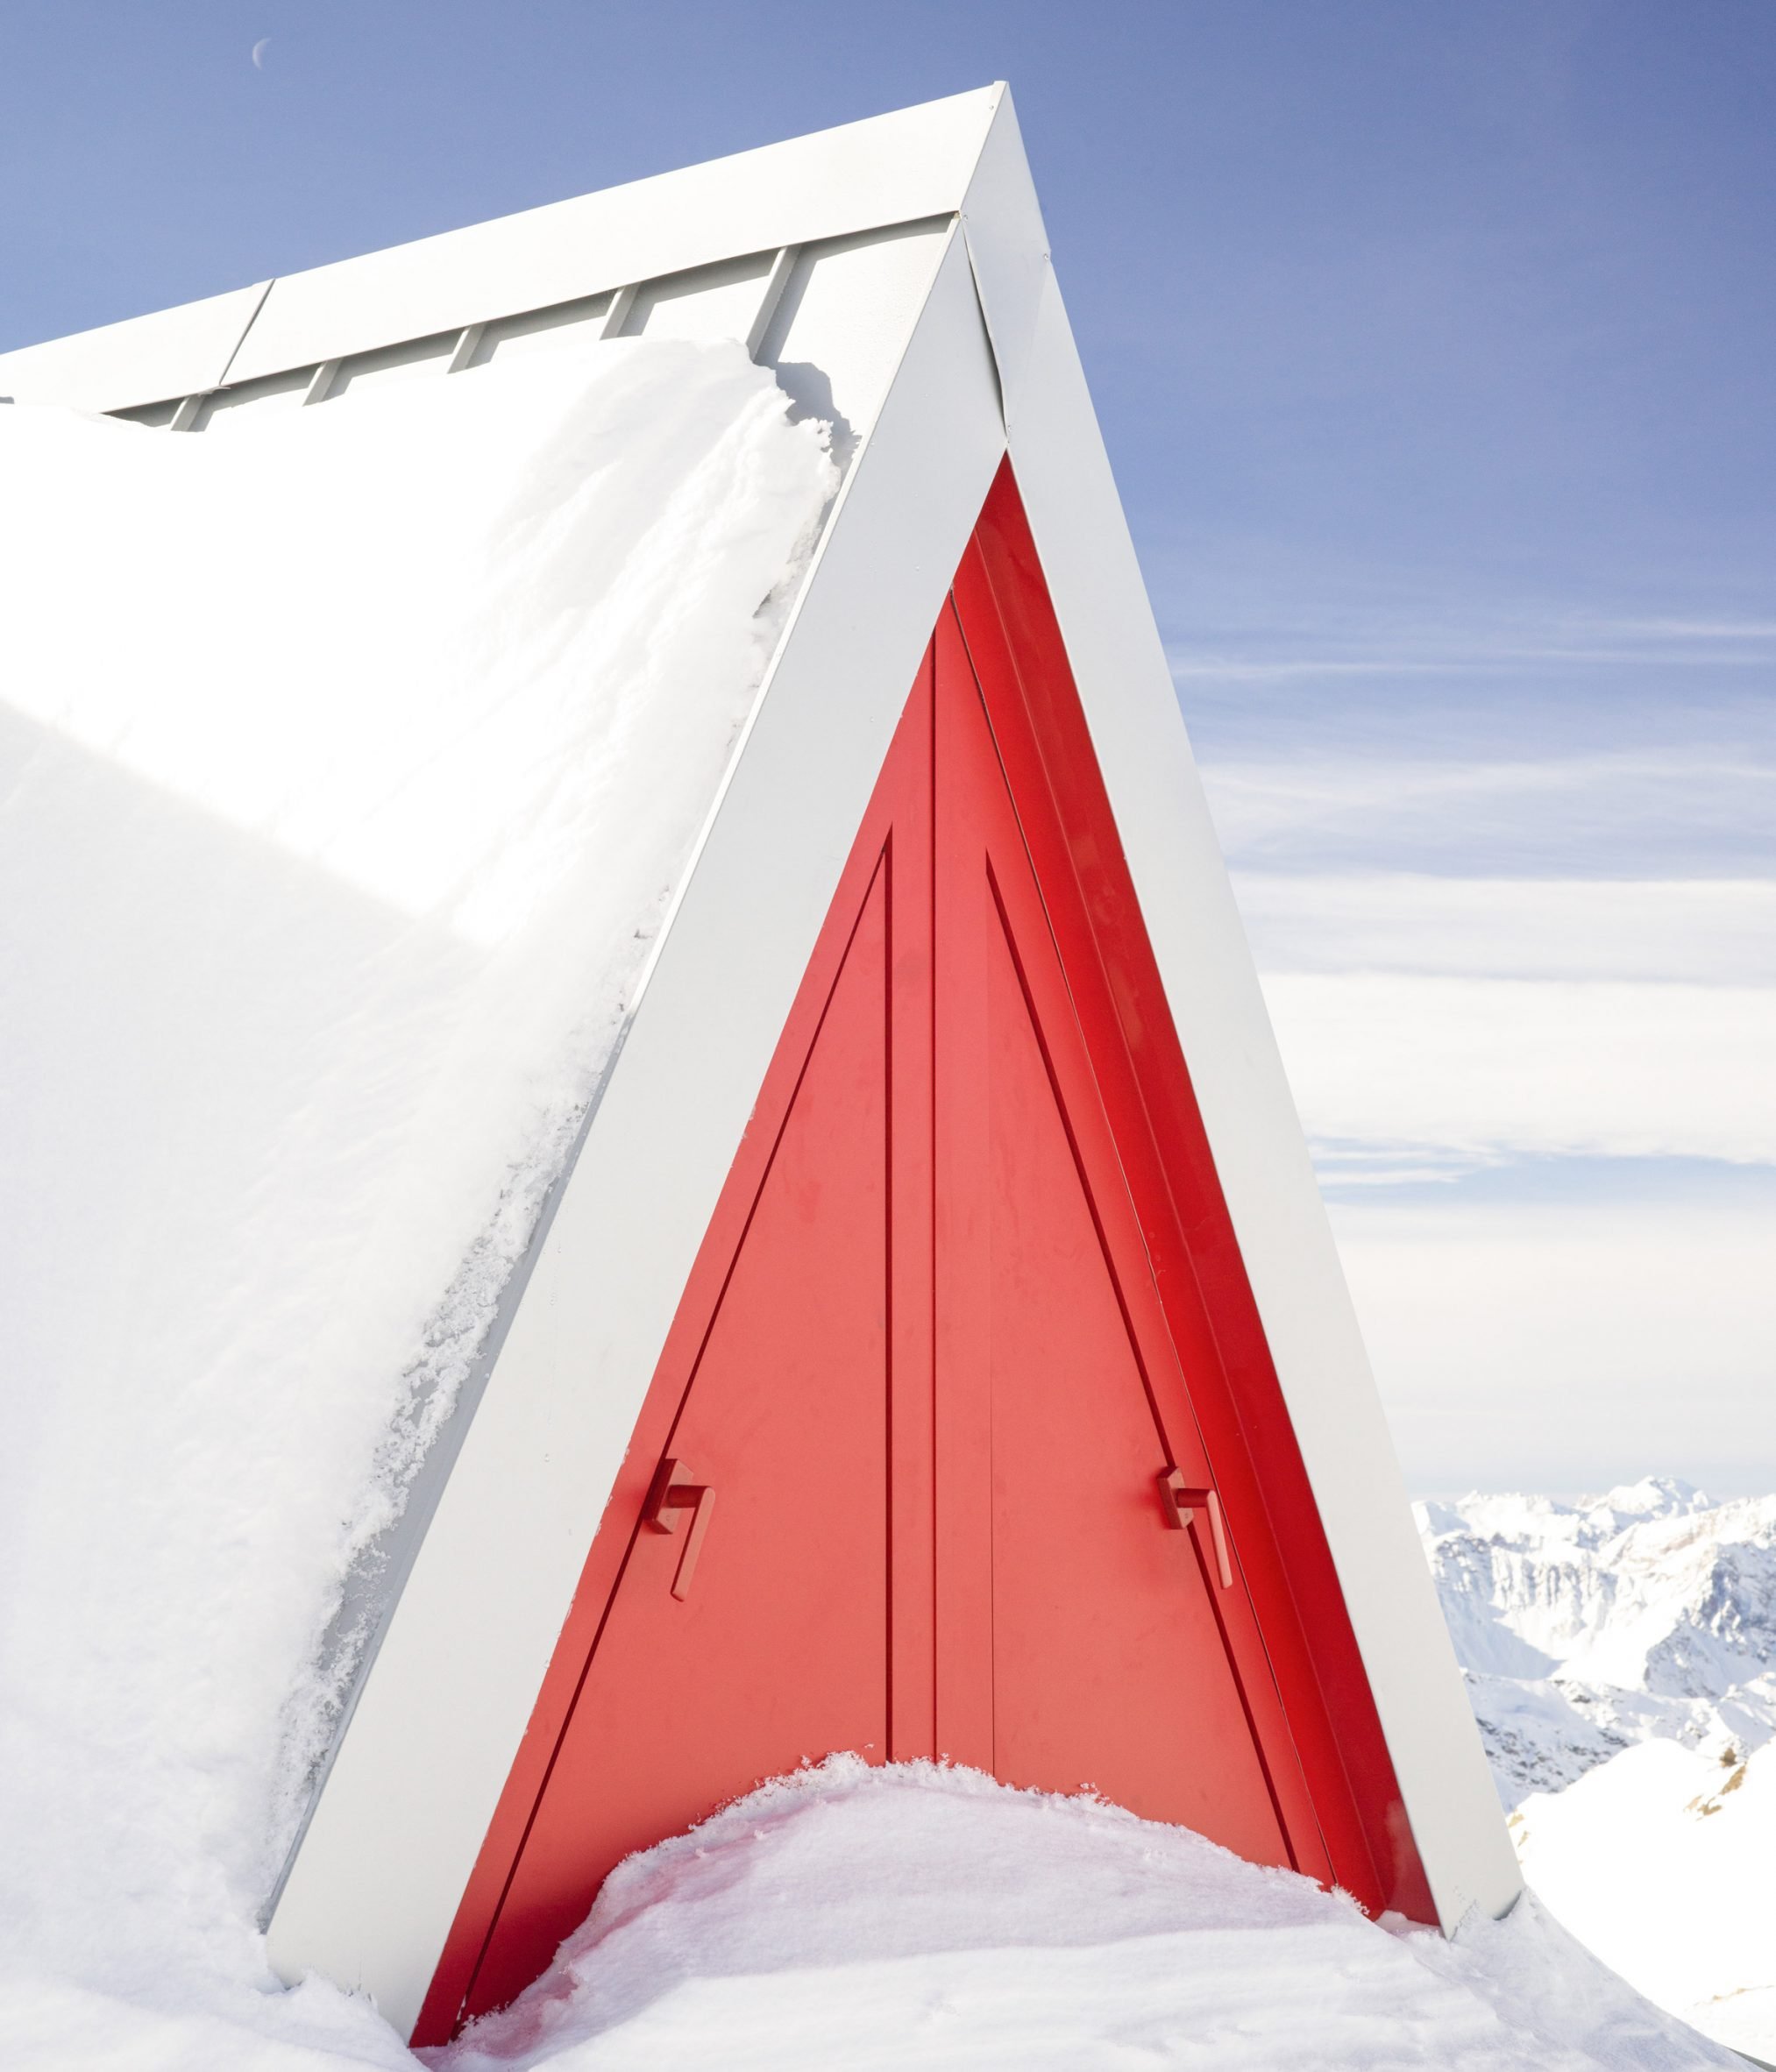 The red triangle door of Pinwheel shelter in the Italian Alps by EX